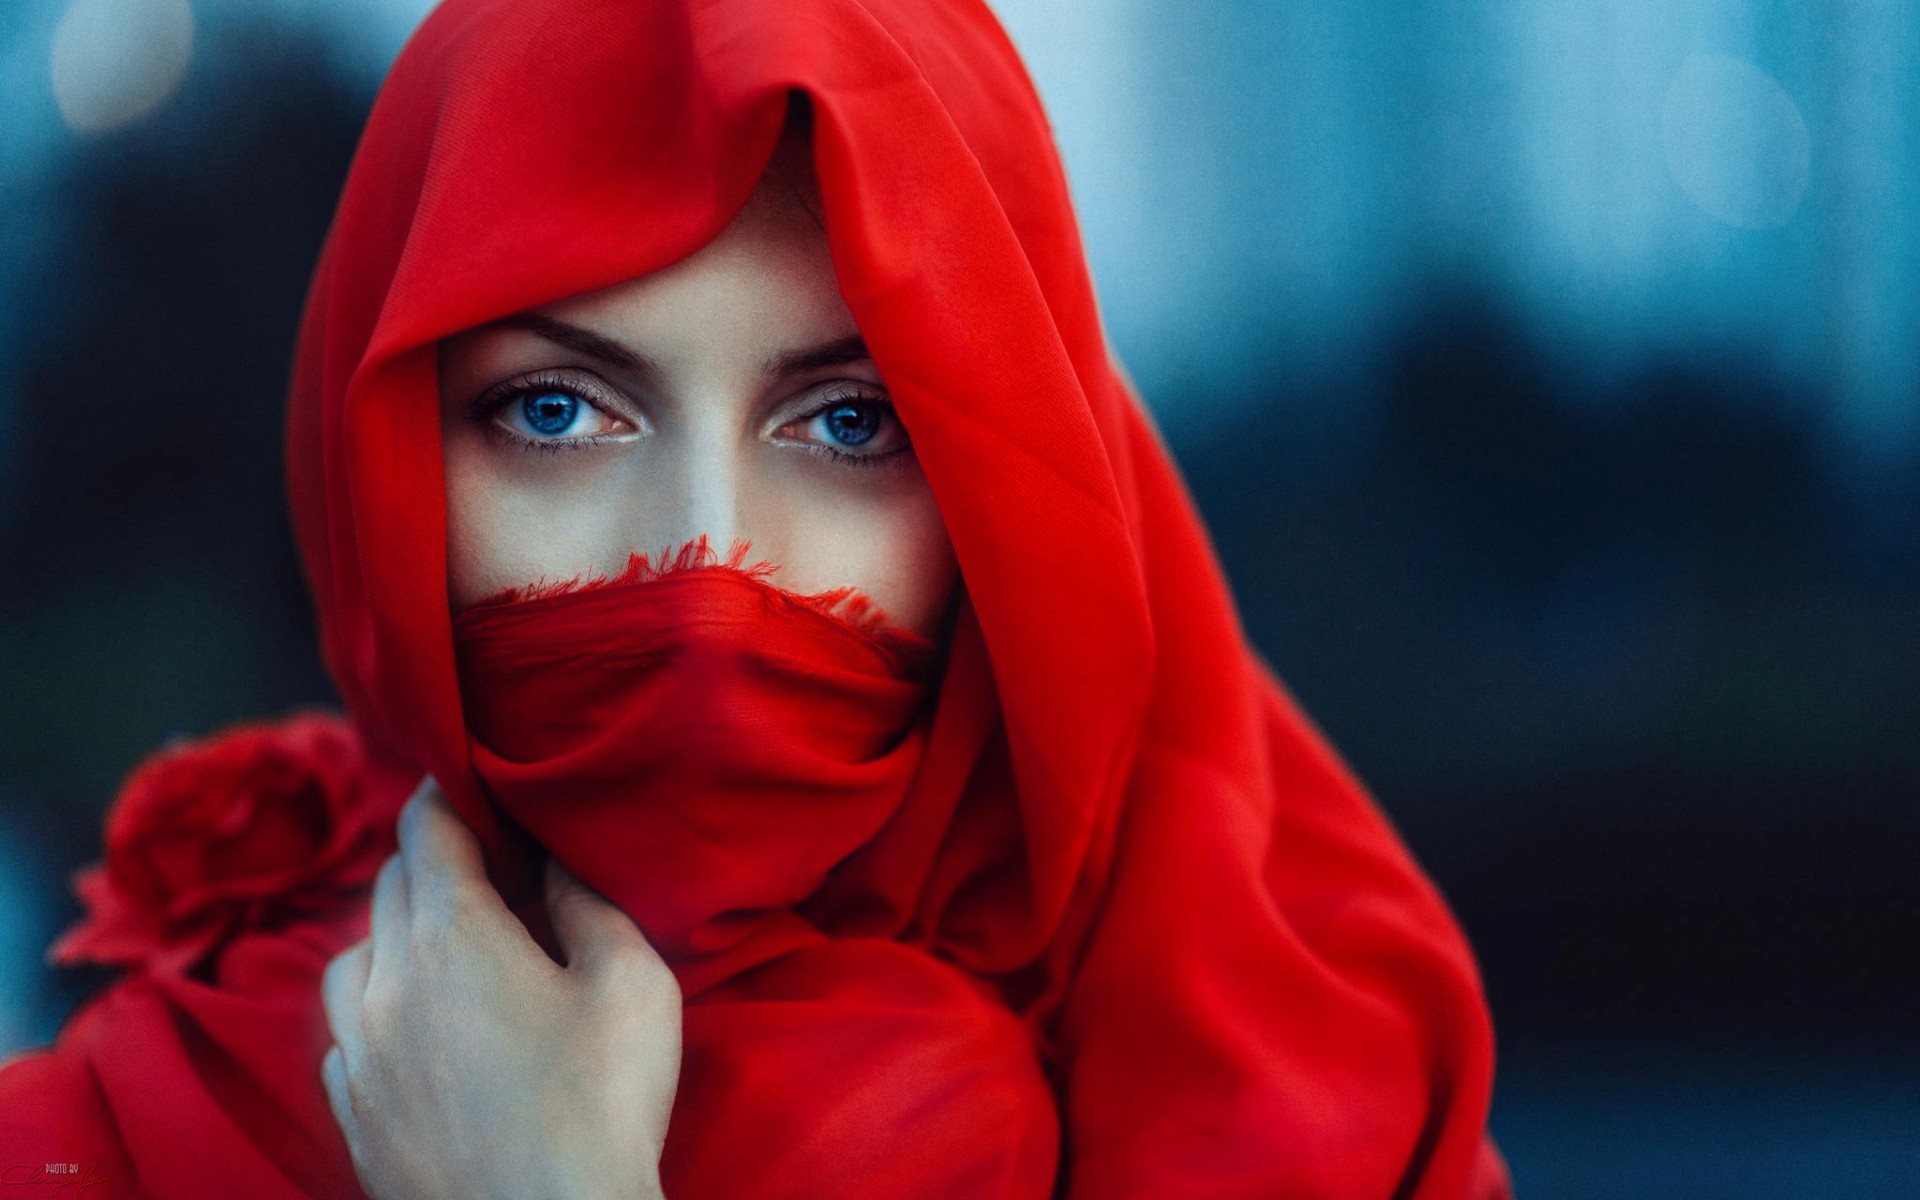 The girl in a red cape covering her face wallpapers and images ...